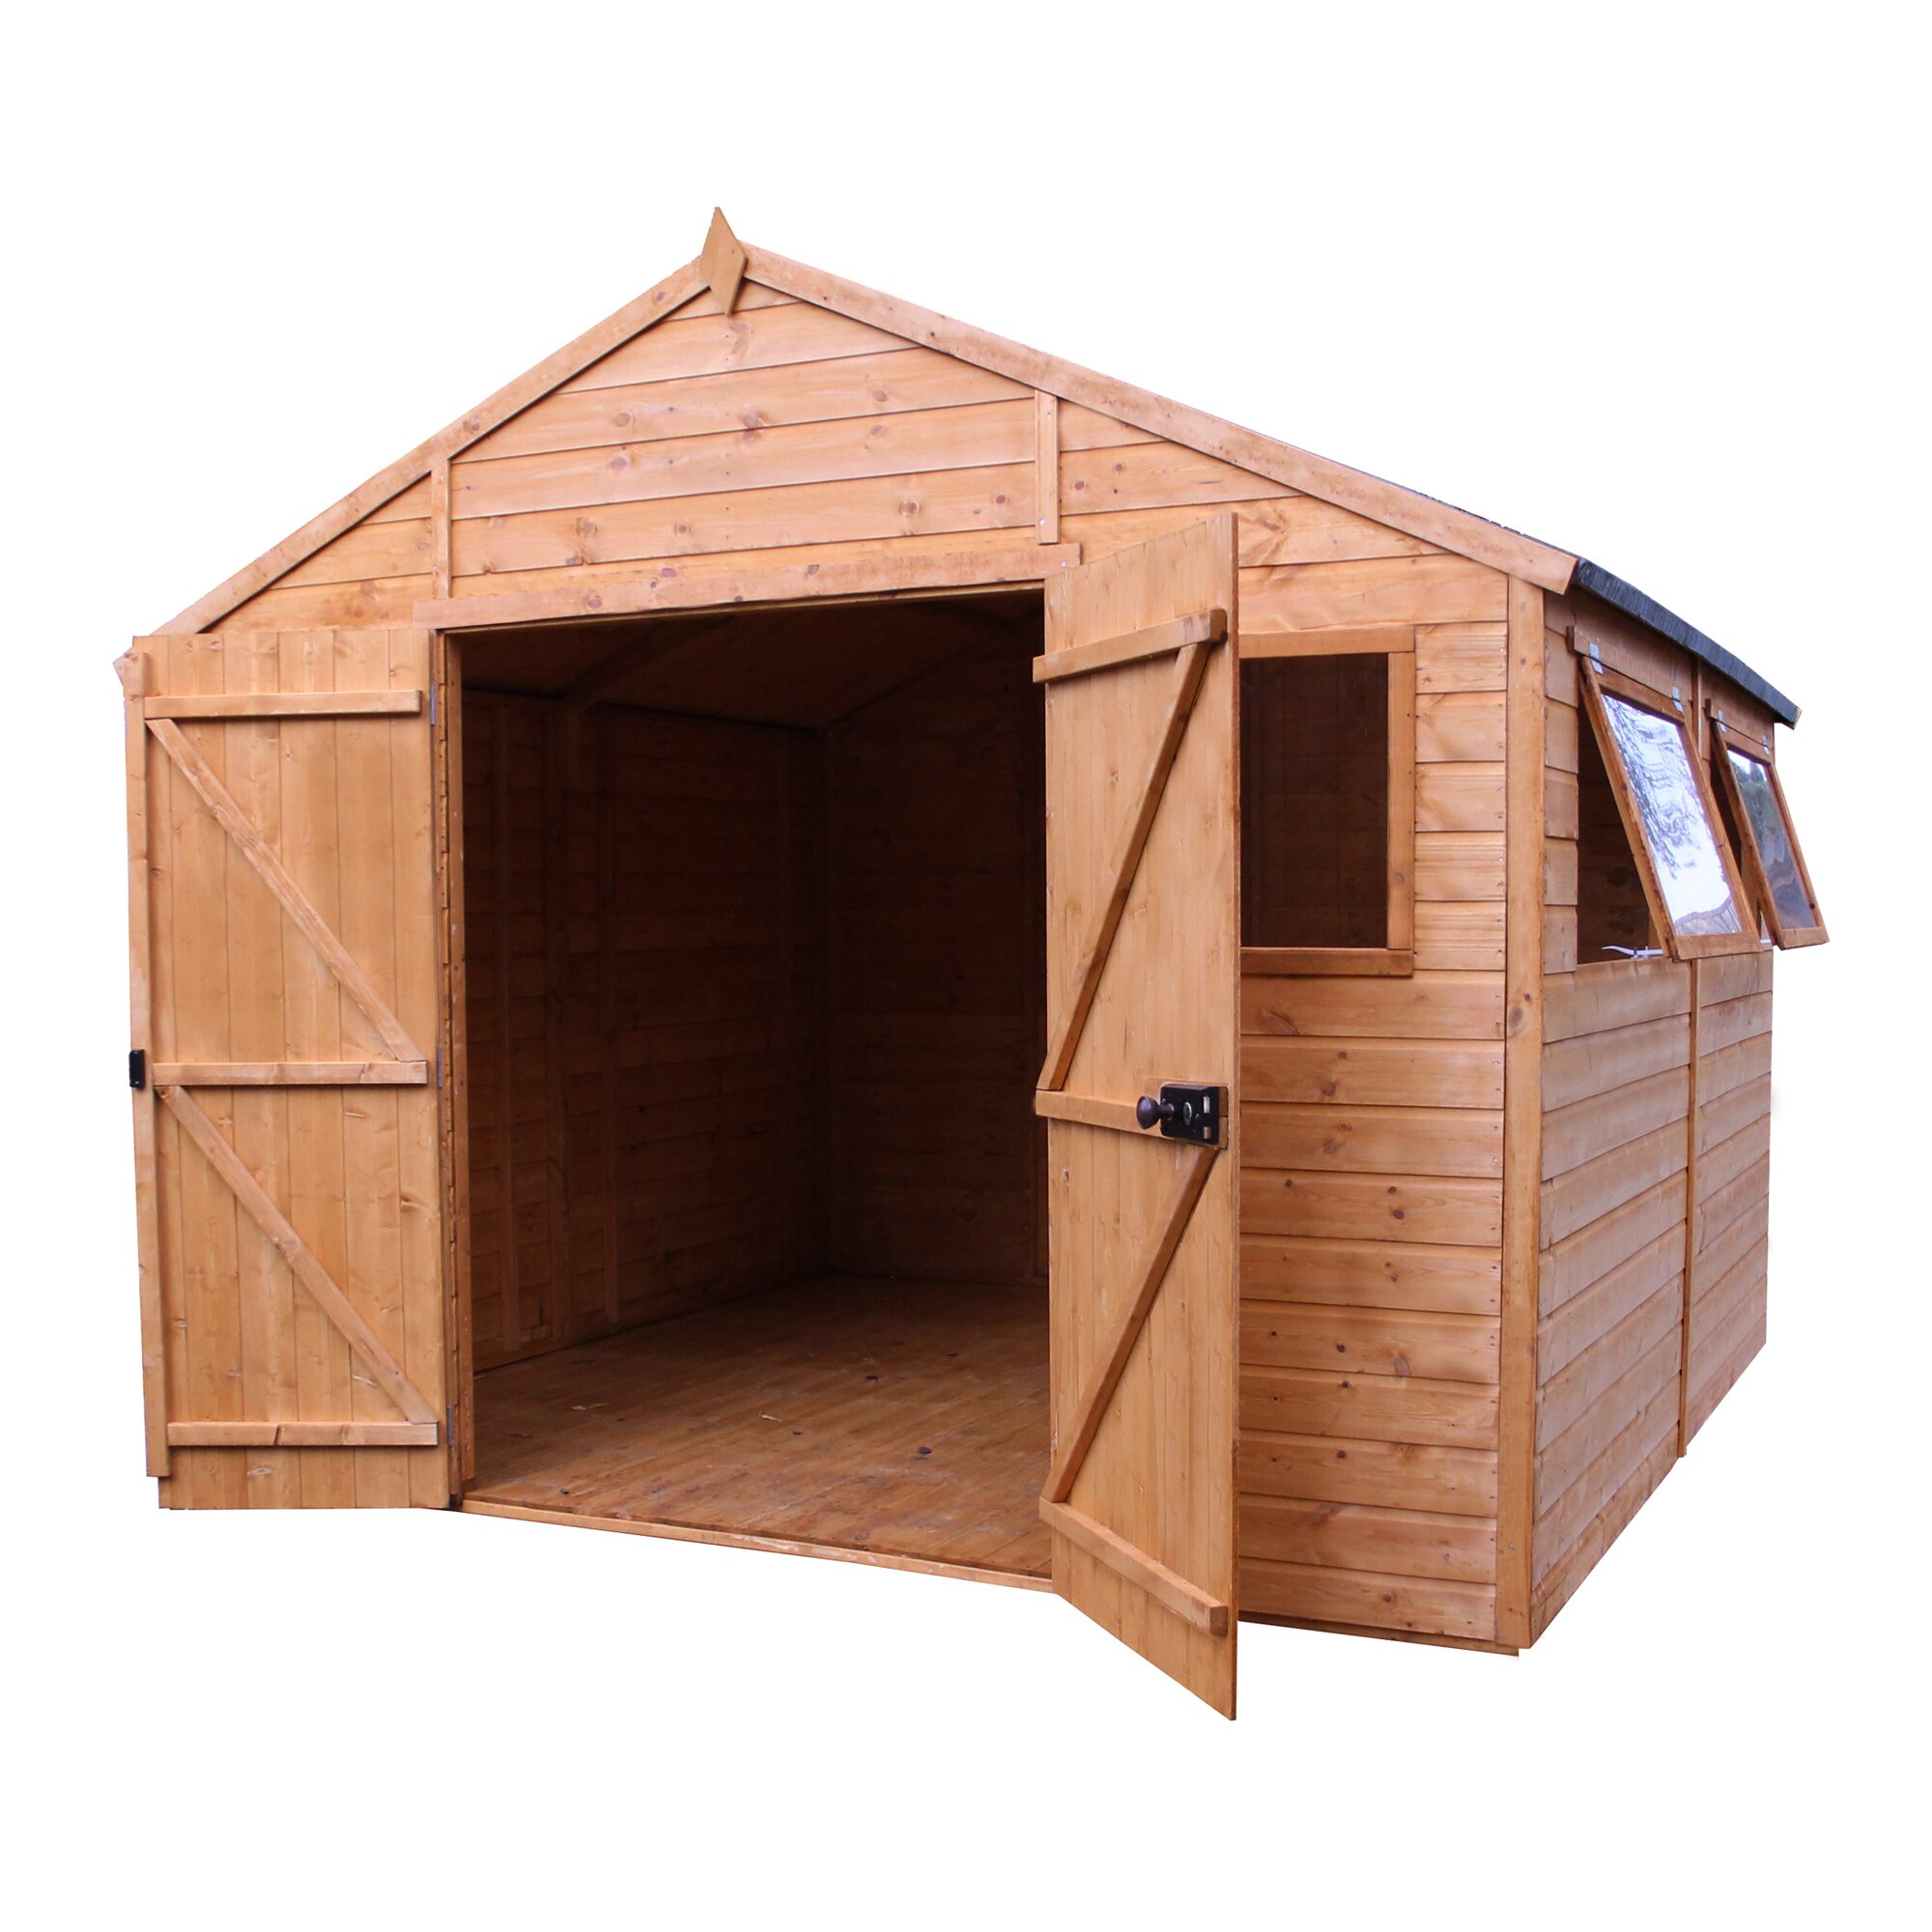 10 x 10 shed - who has the best?